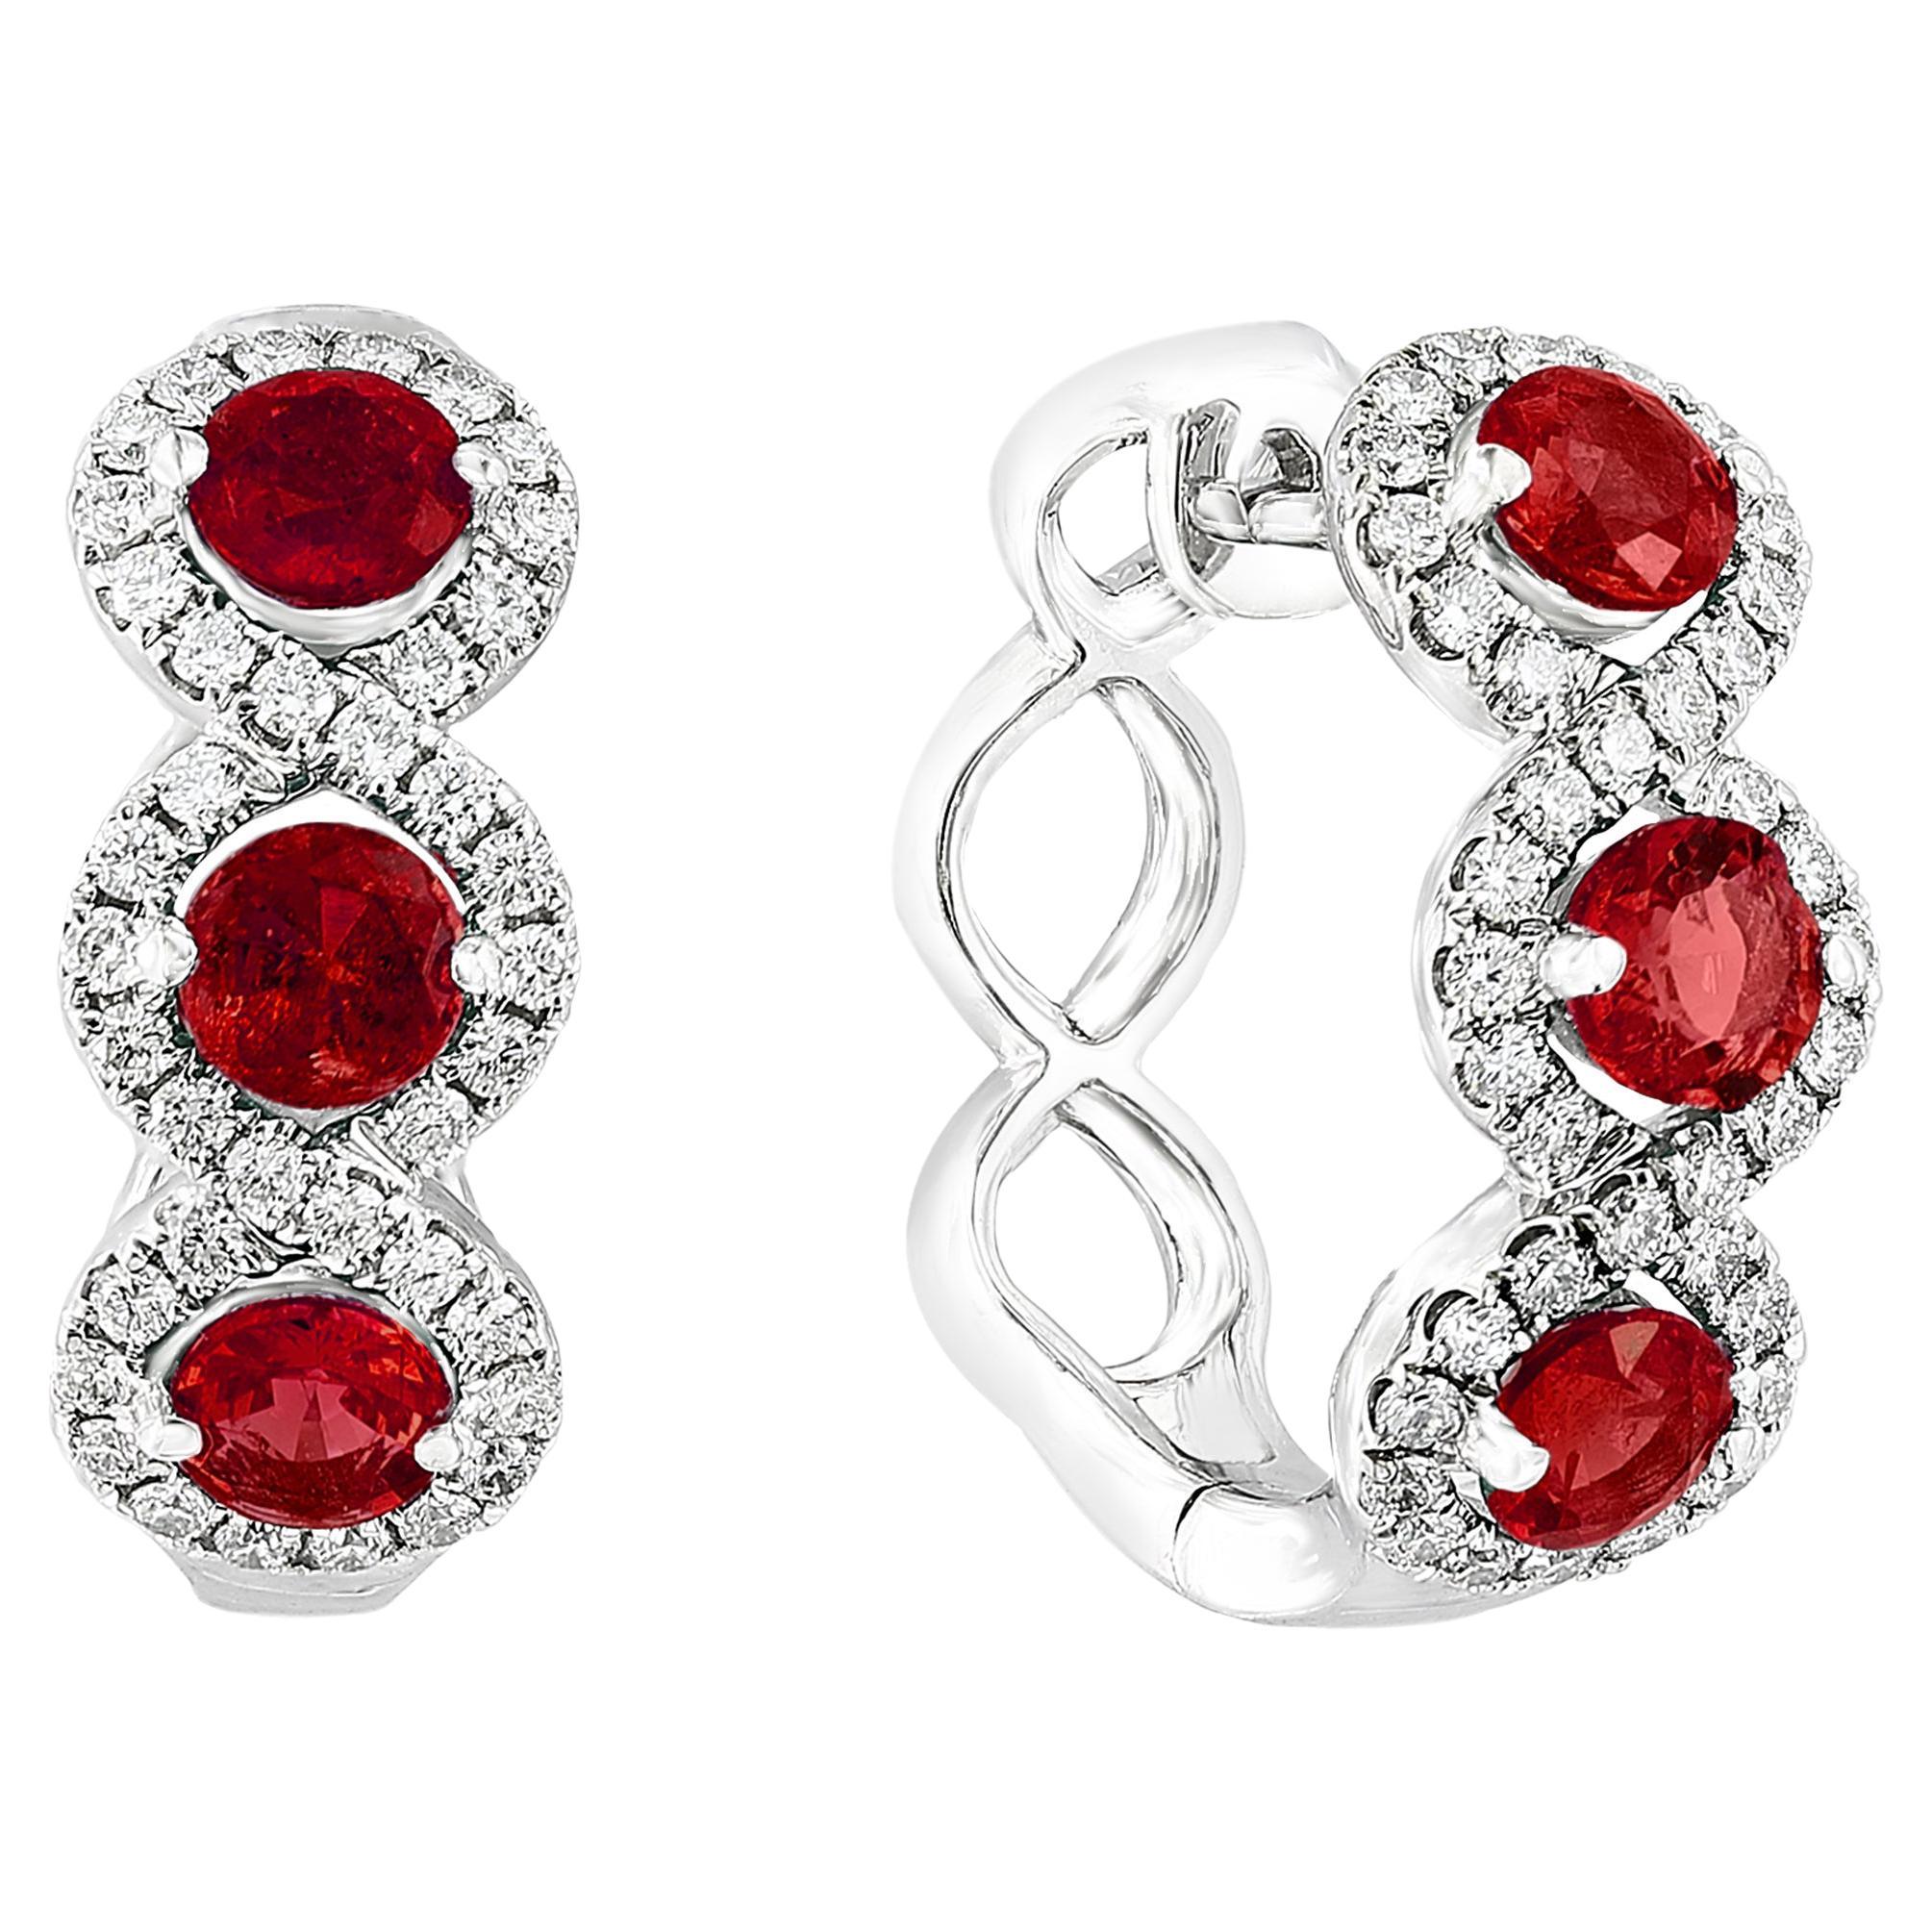 1.68 Carat Round Cut Ruby and Diamond Hoop Earrings in 18K White Gold